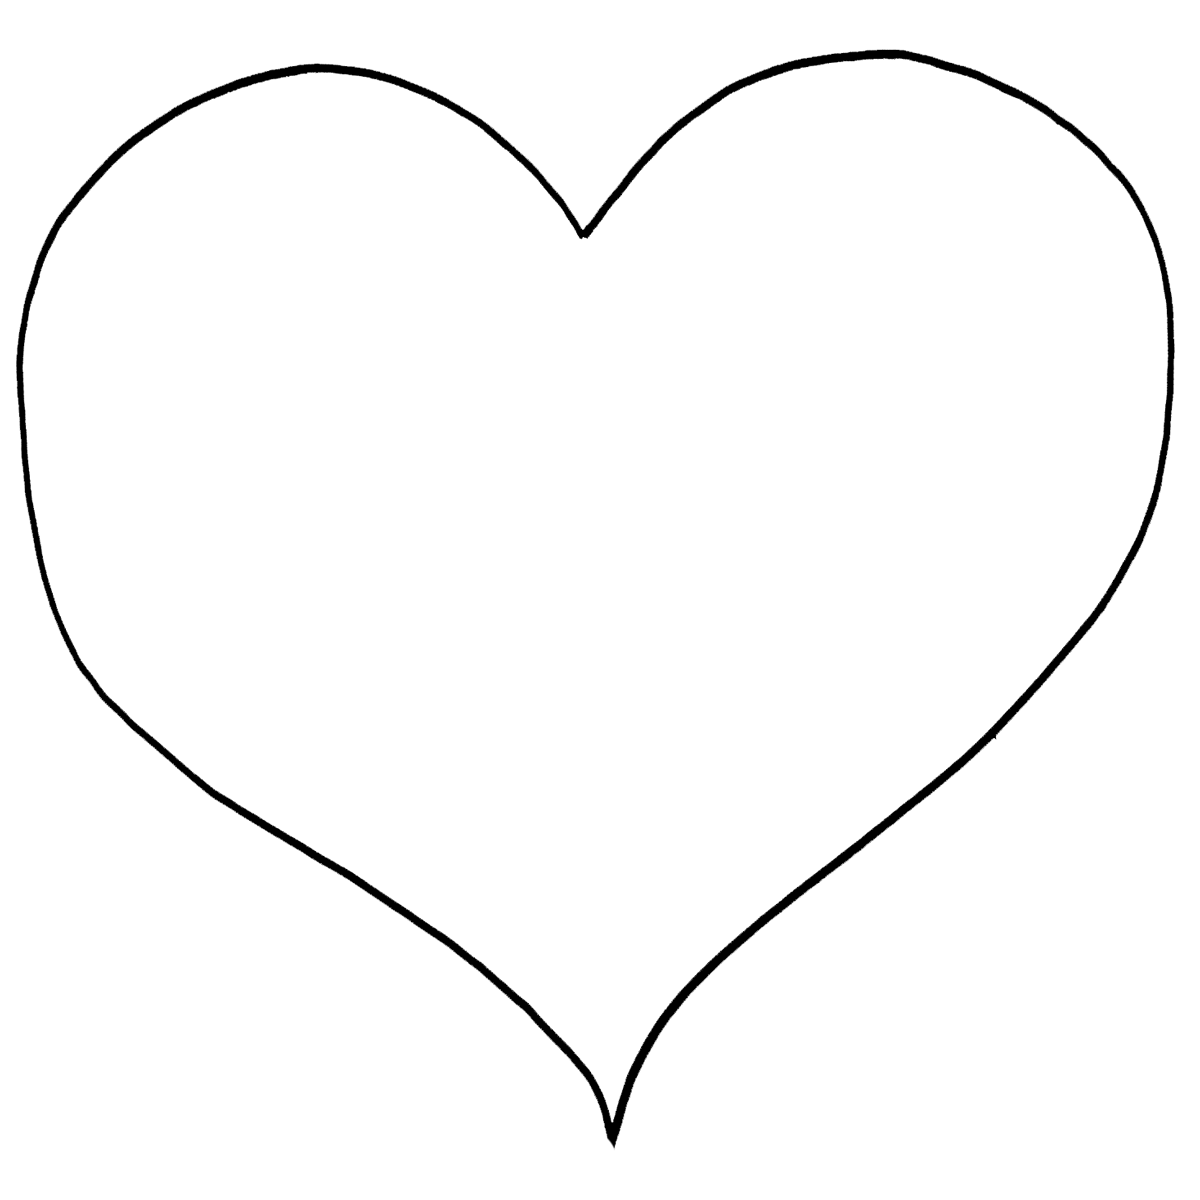 coloring pages of a heart valentine hearts coloring pages free heart printables coloring heart of a pages 